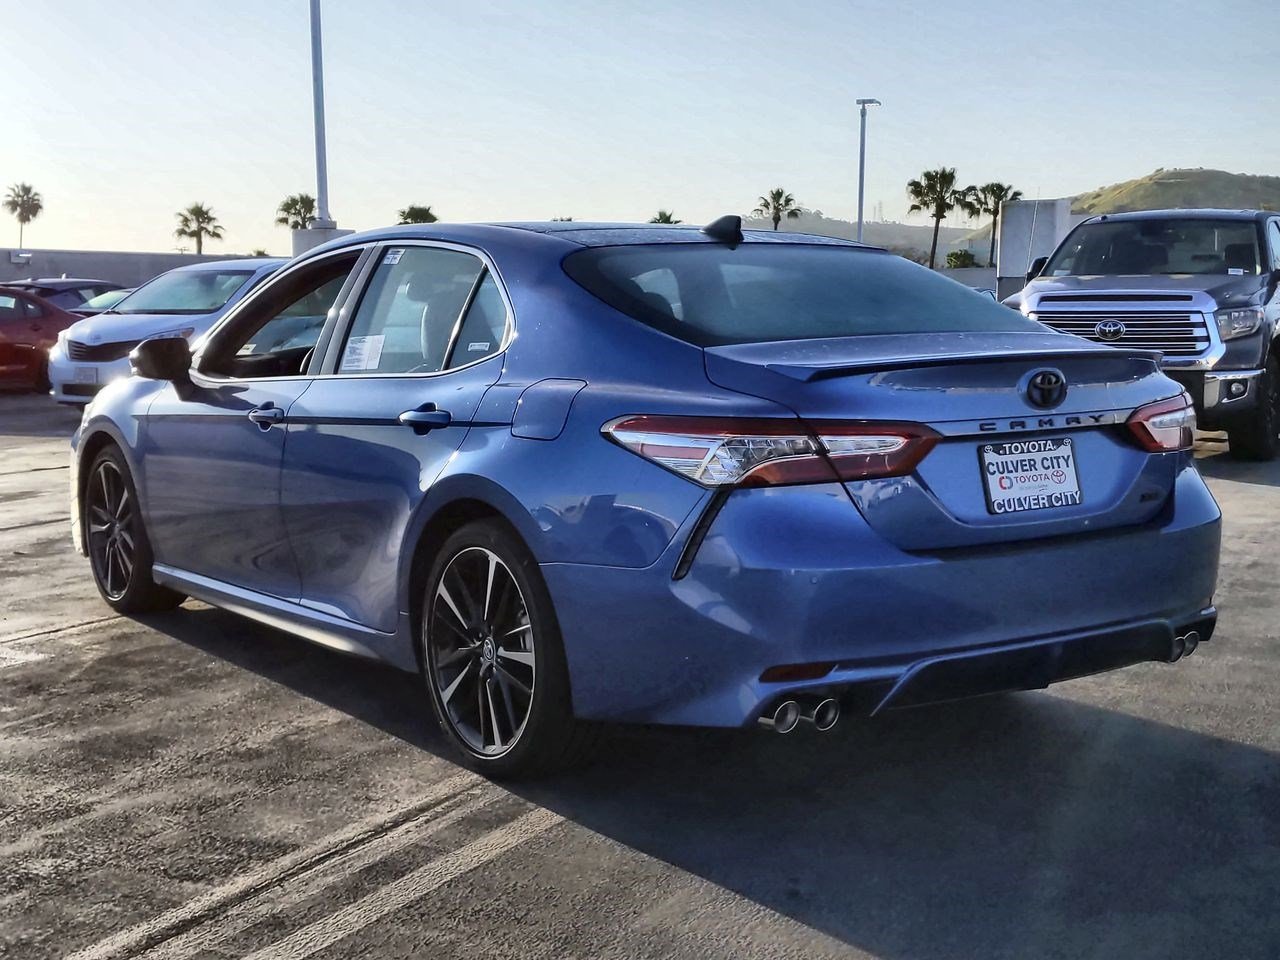 New 2019 Toyota Camry XSE V6 4dr Car in Culver City #23243 | Culver